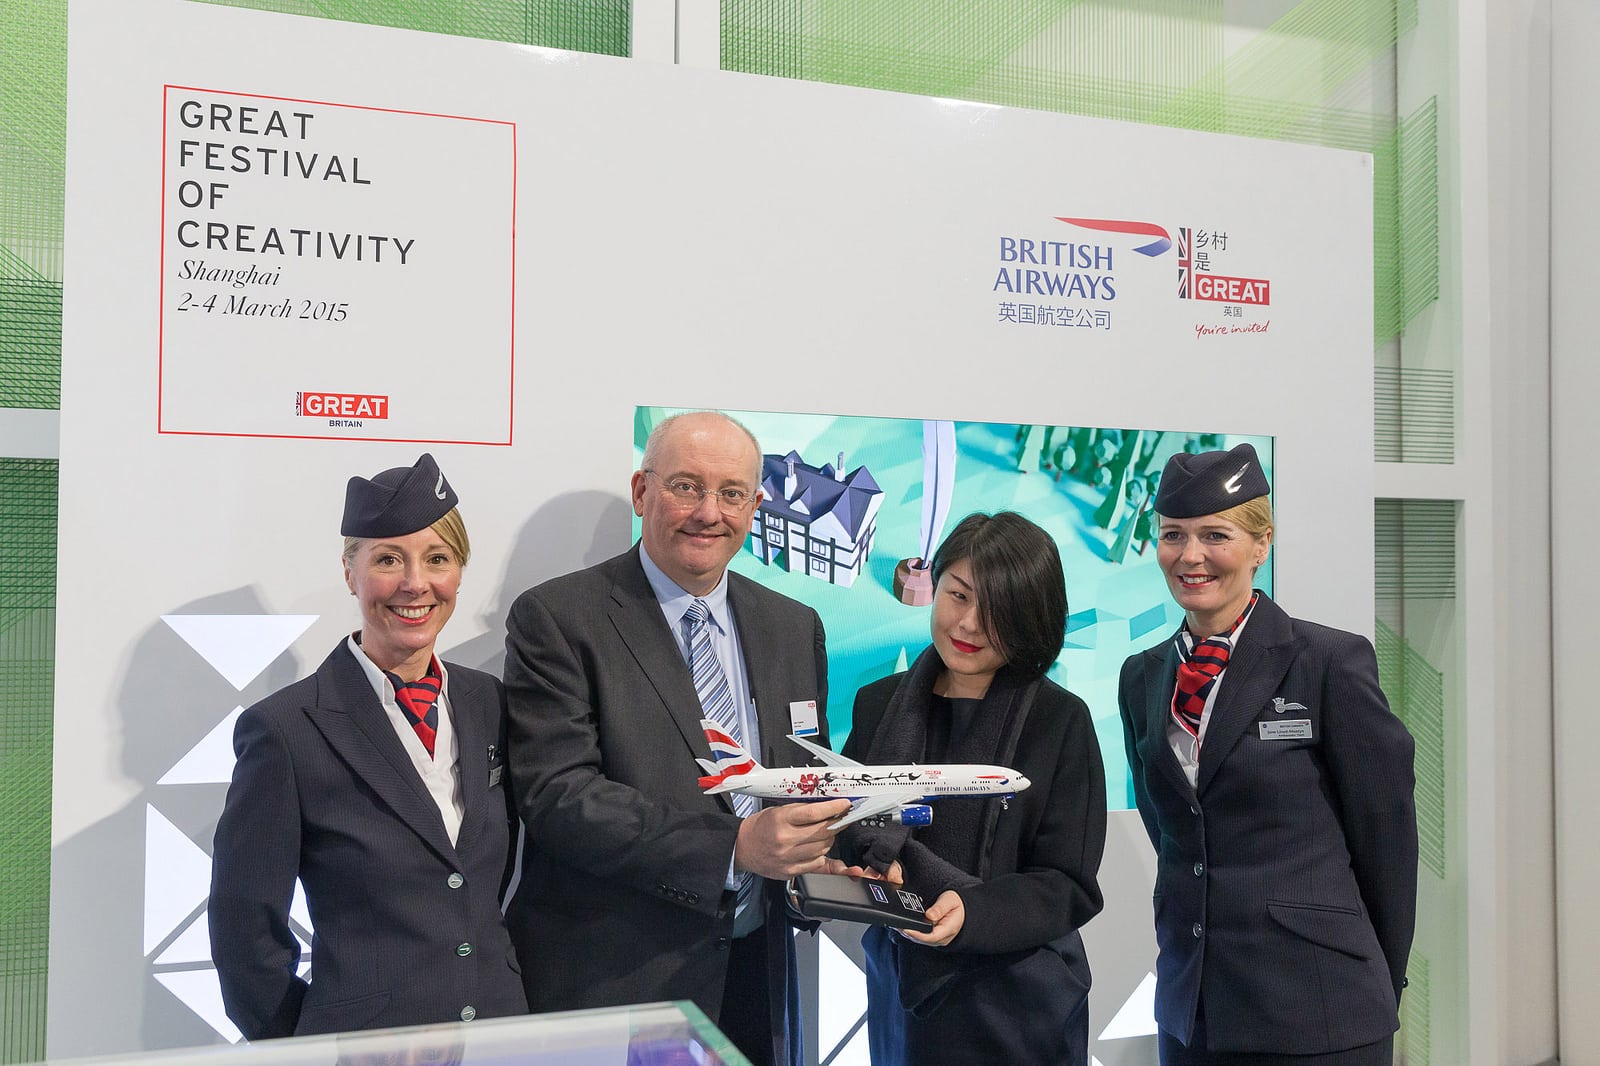 British Airways promoted itself in 2015 at the GREAT Festival of Creativity in Shanghai. British Airways will have the rights to start new China flights under a deal announced Tuesday.